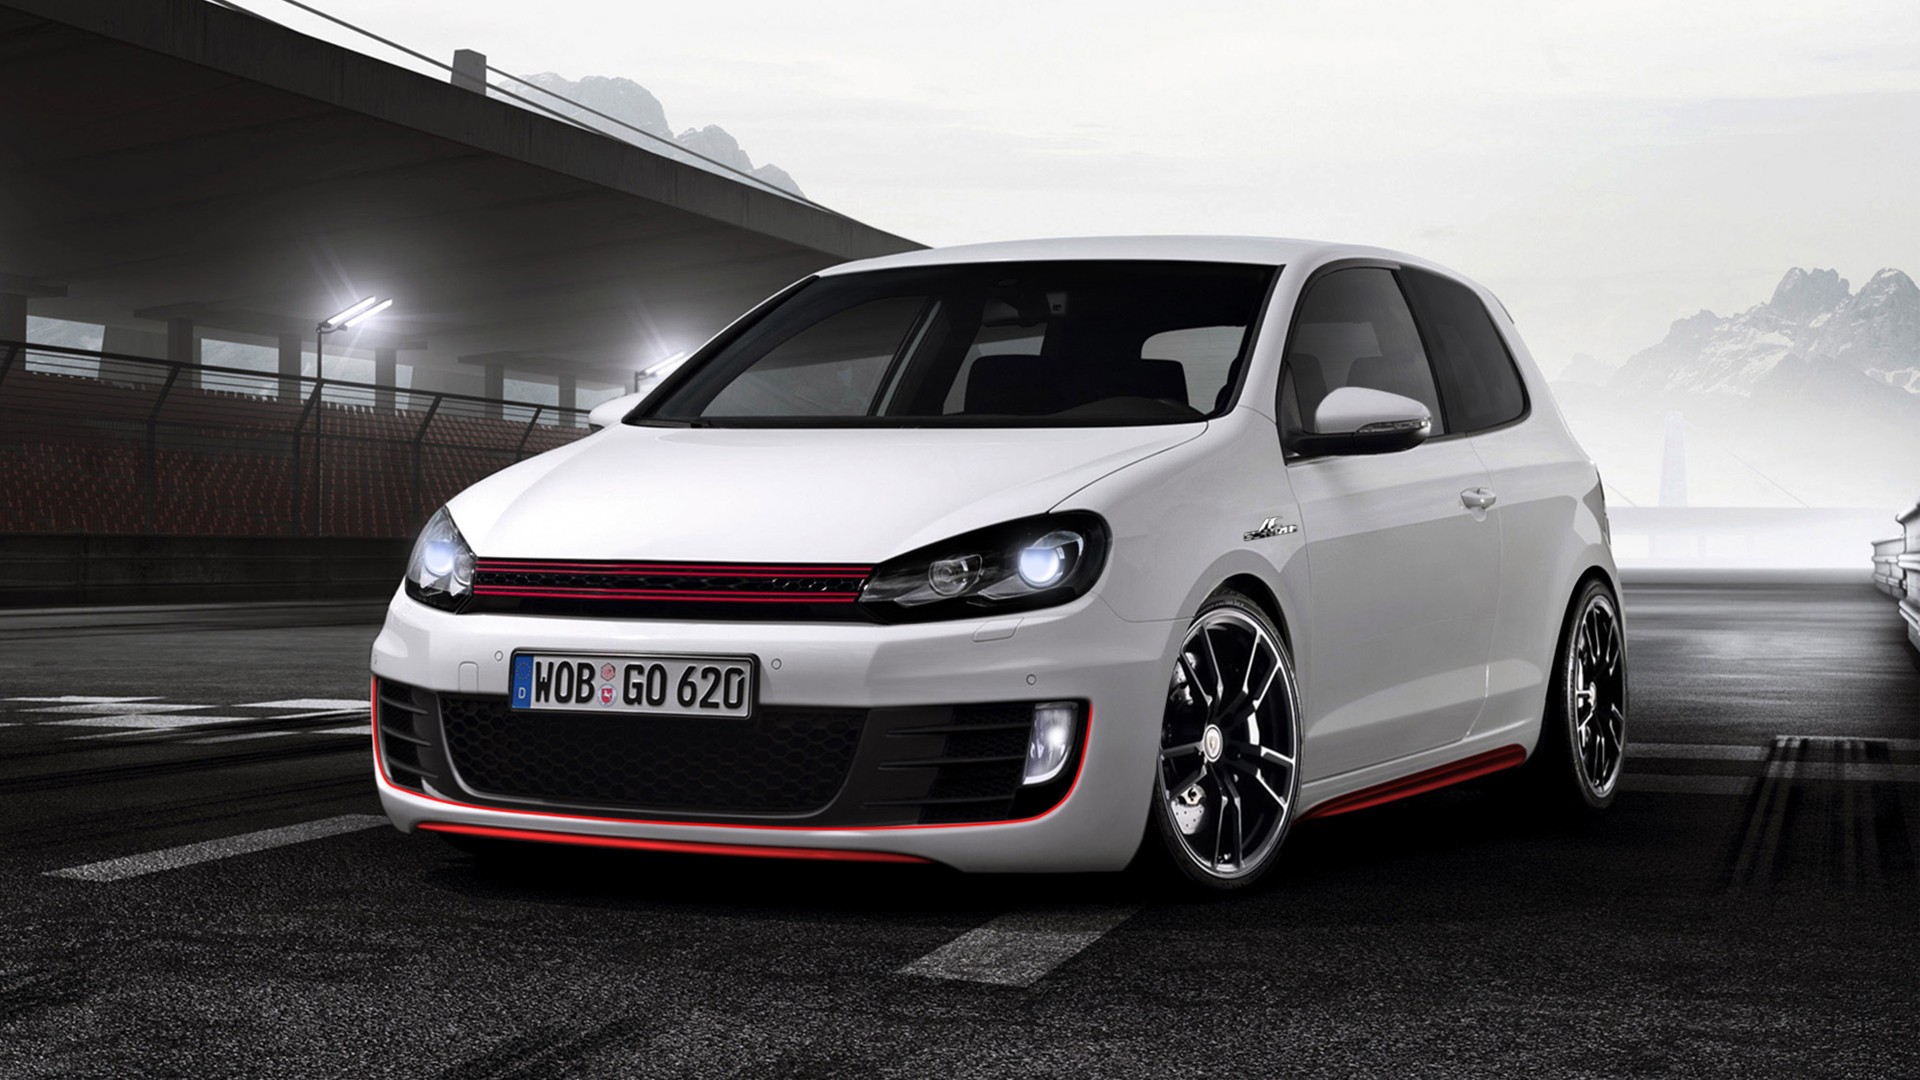 Wallpapers Vw Golf 7 Gti 2012 Pictures toon Pinterest